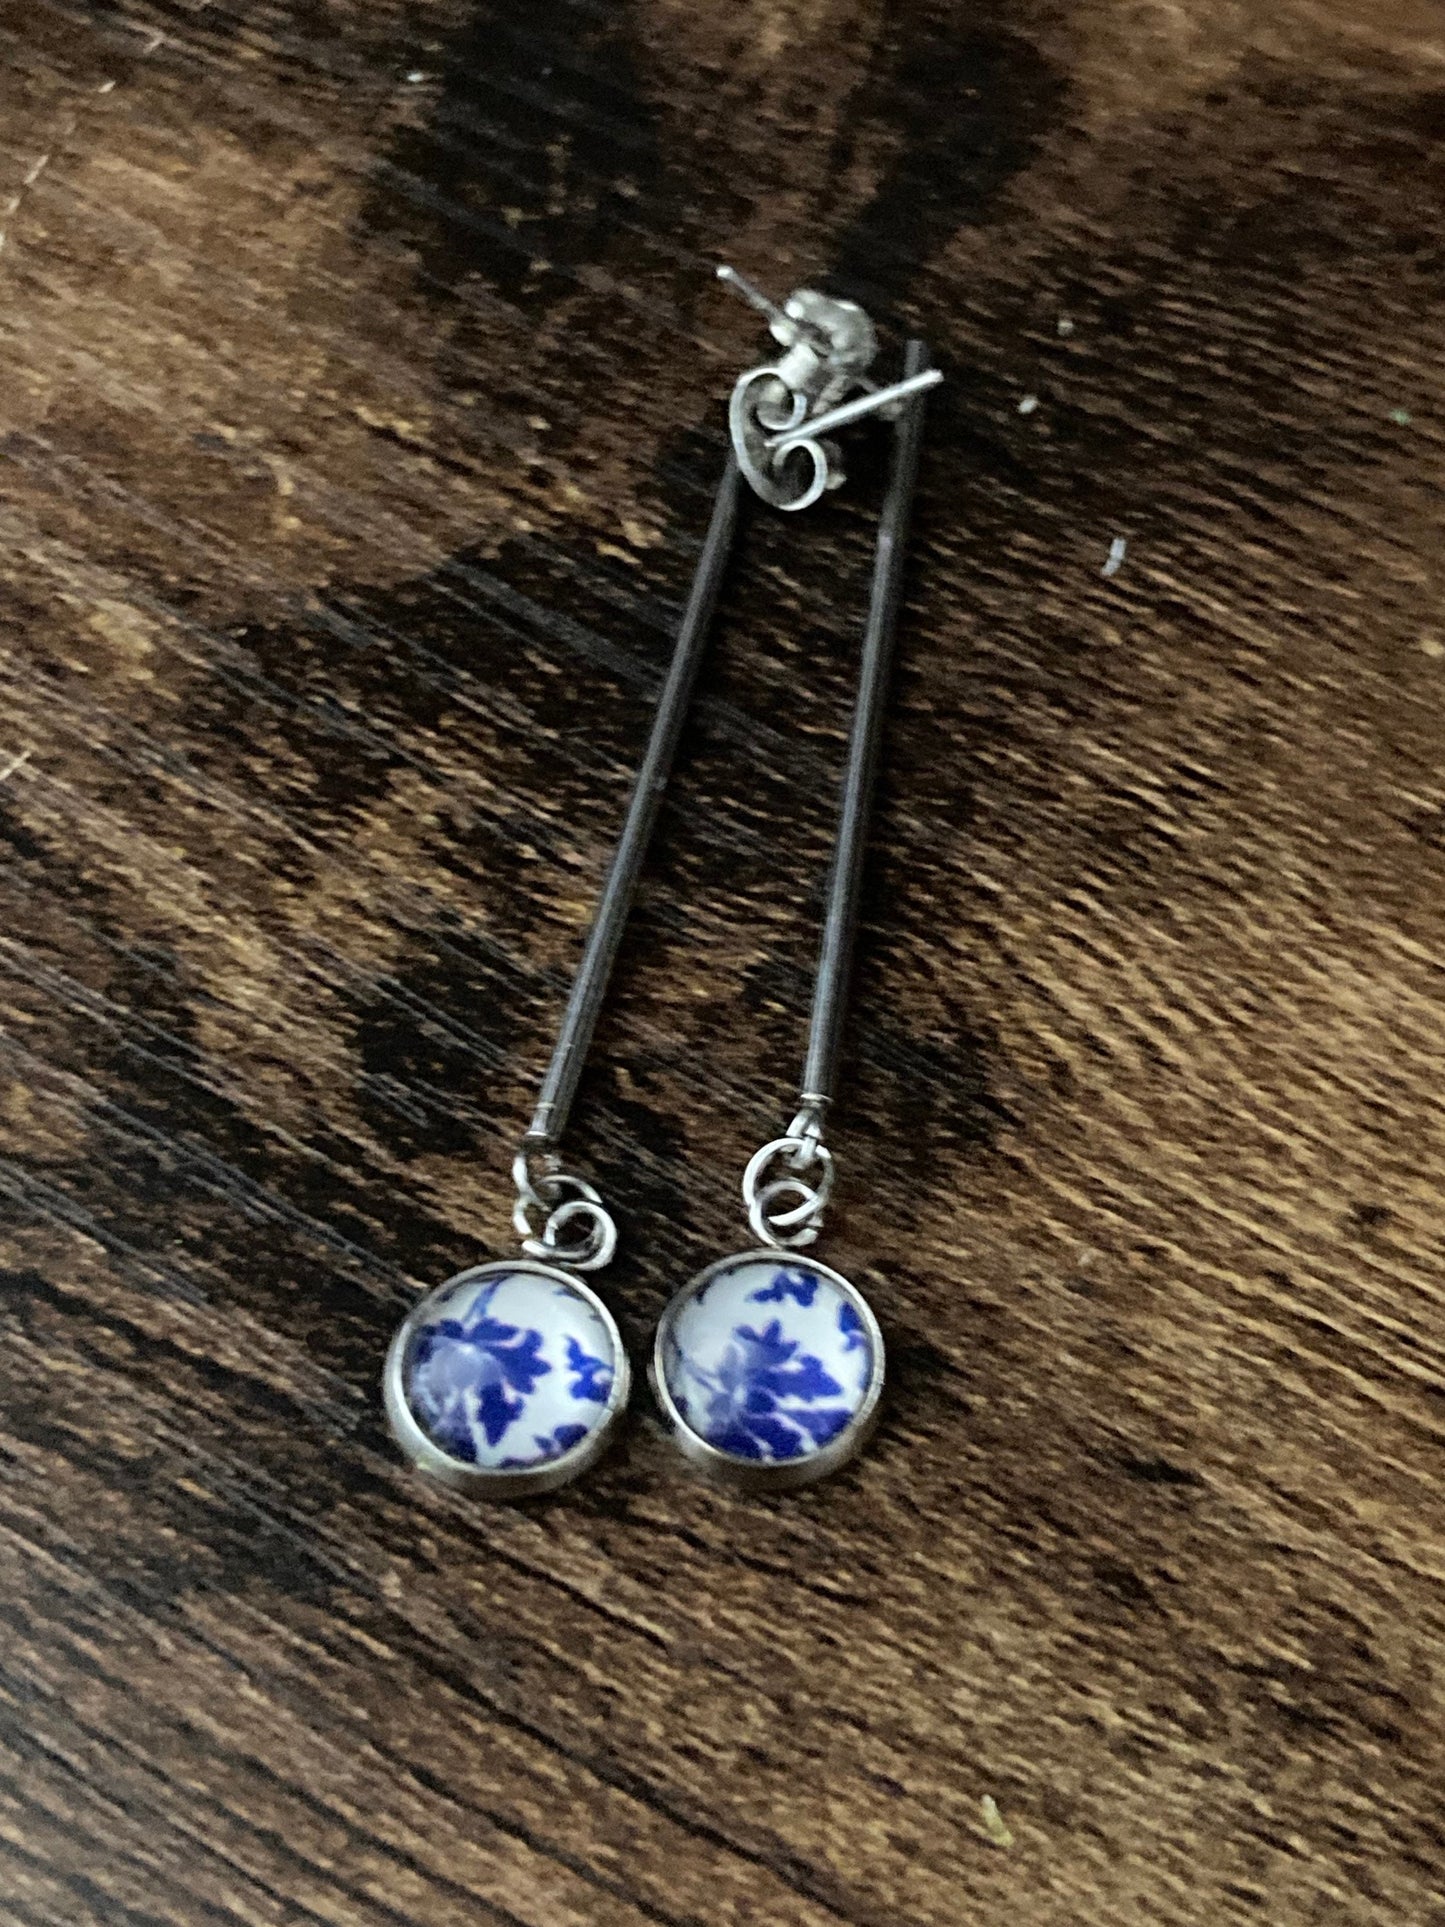 round blue and white earrings oriental floral print glass stainless steel studs